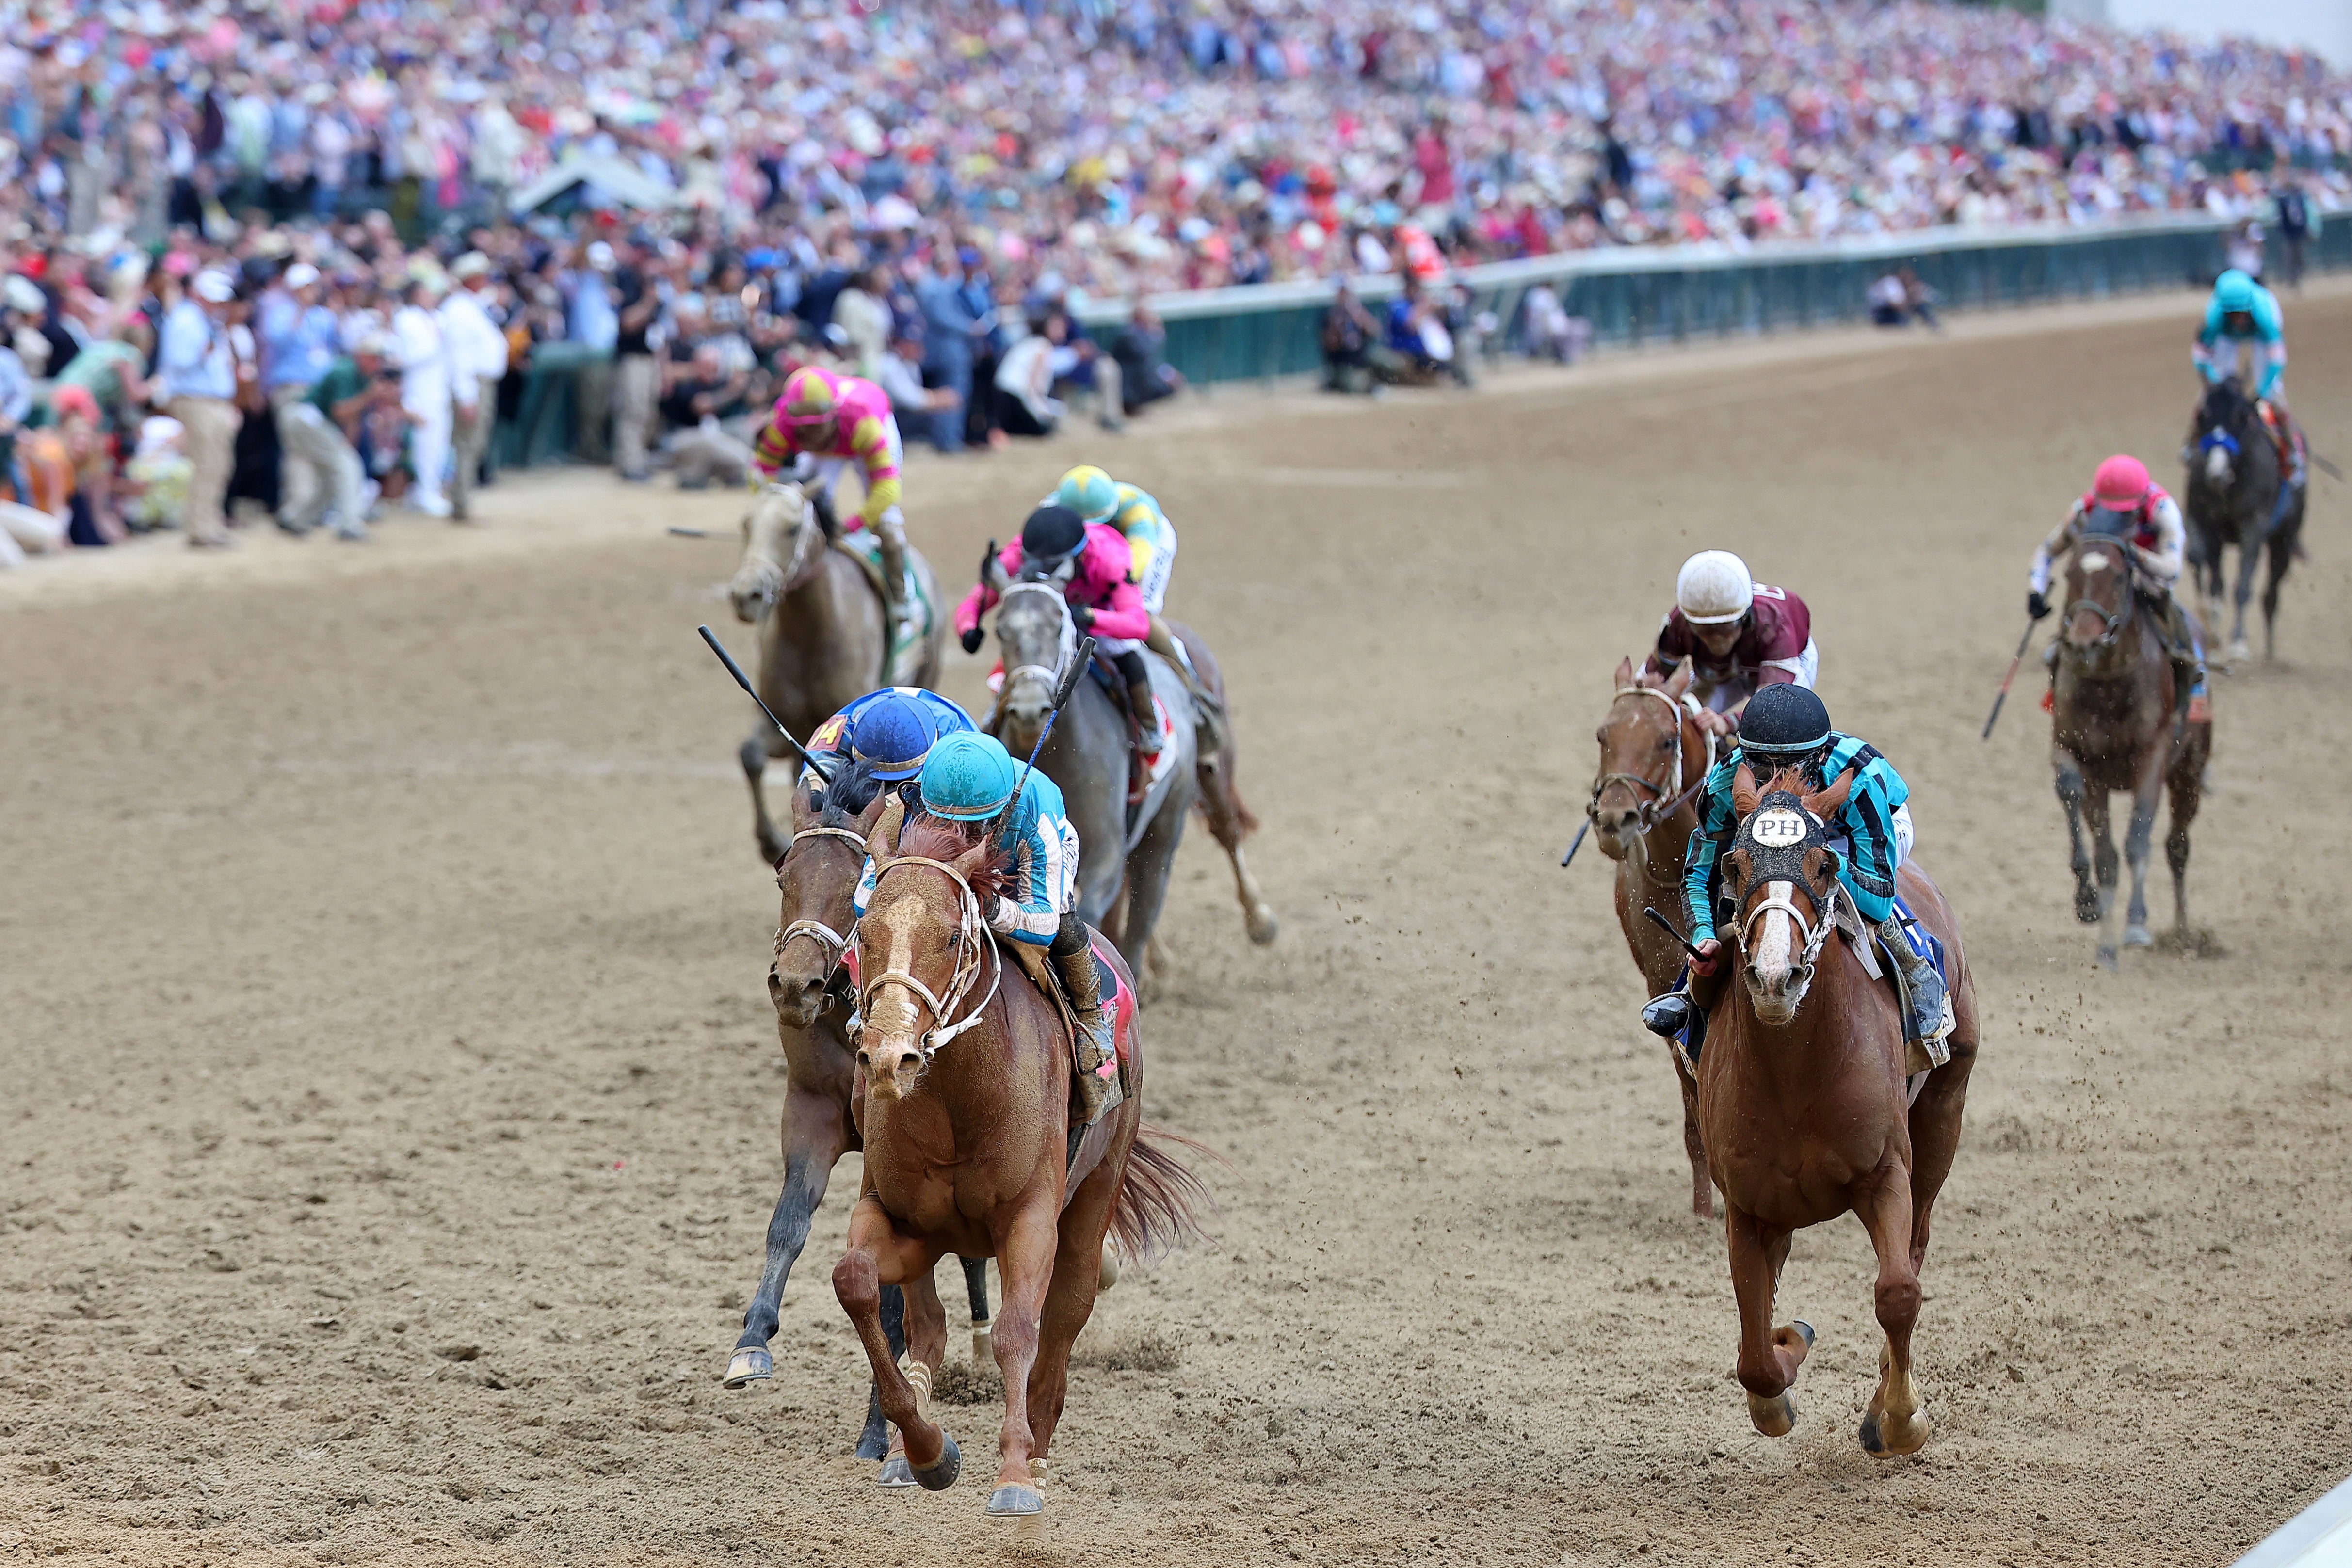 The Kentucky Derby will be held for the 150th time